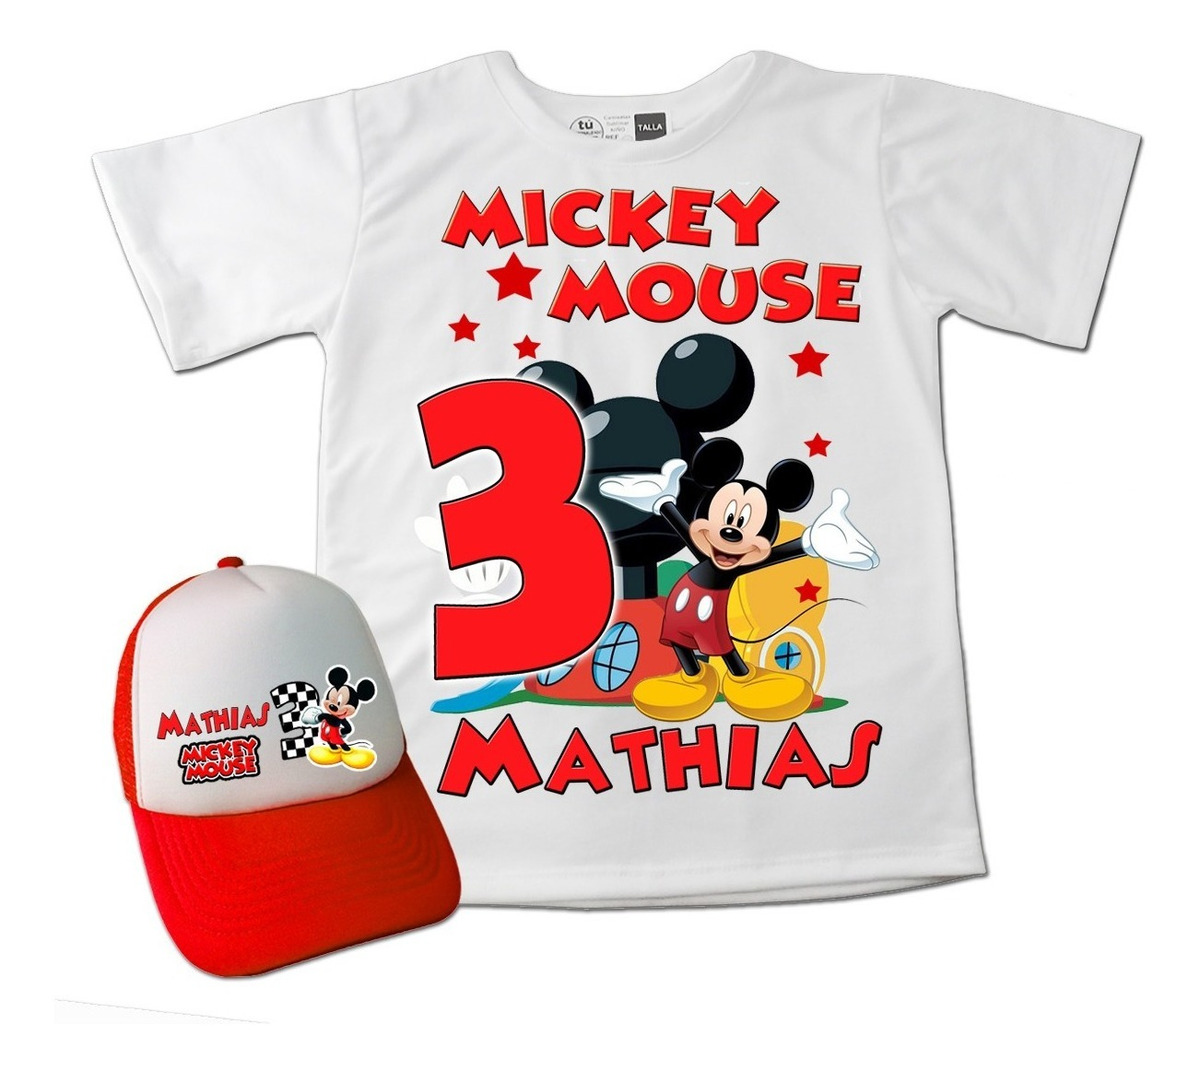 Camisa De Mickey Mouse Niños Outlet, SAVE 53%.